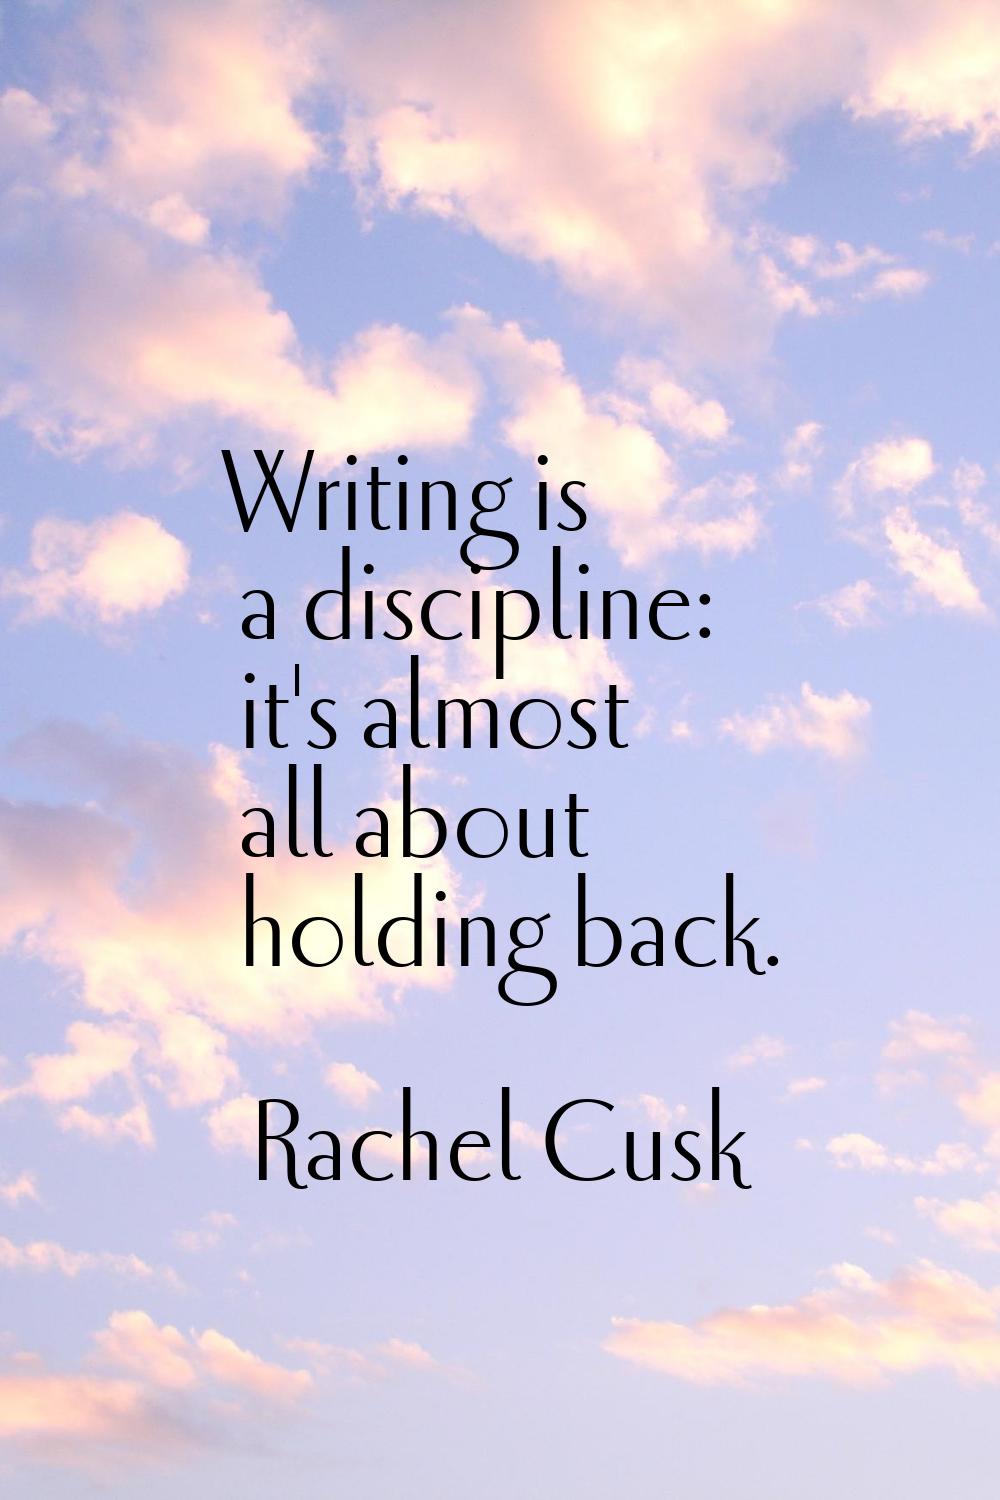 Writing is a discipline: it's almost all about holding back.